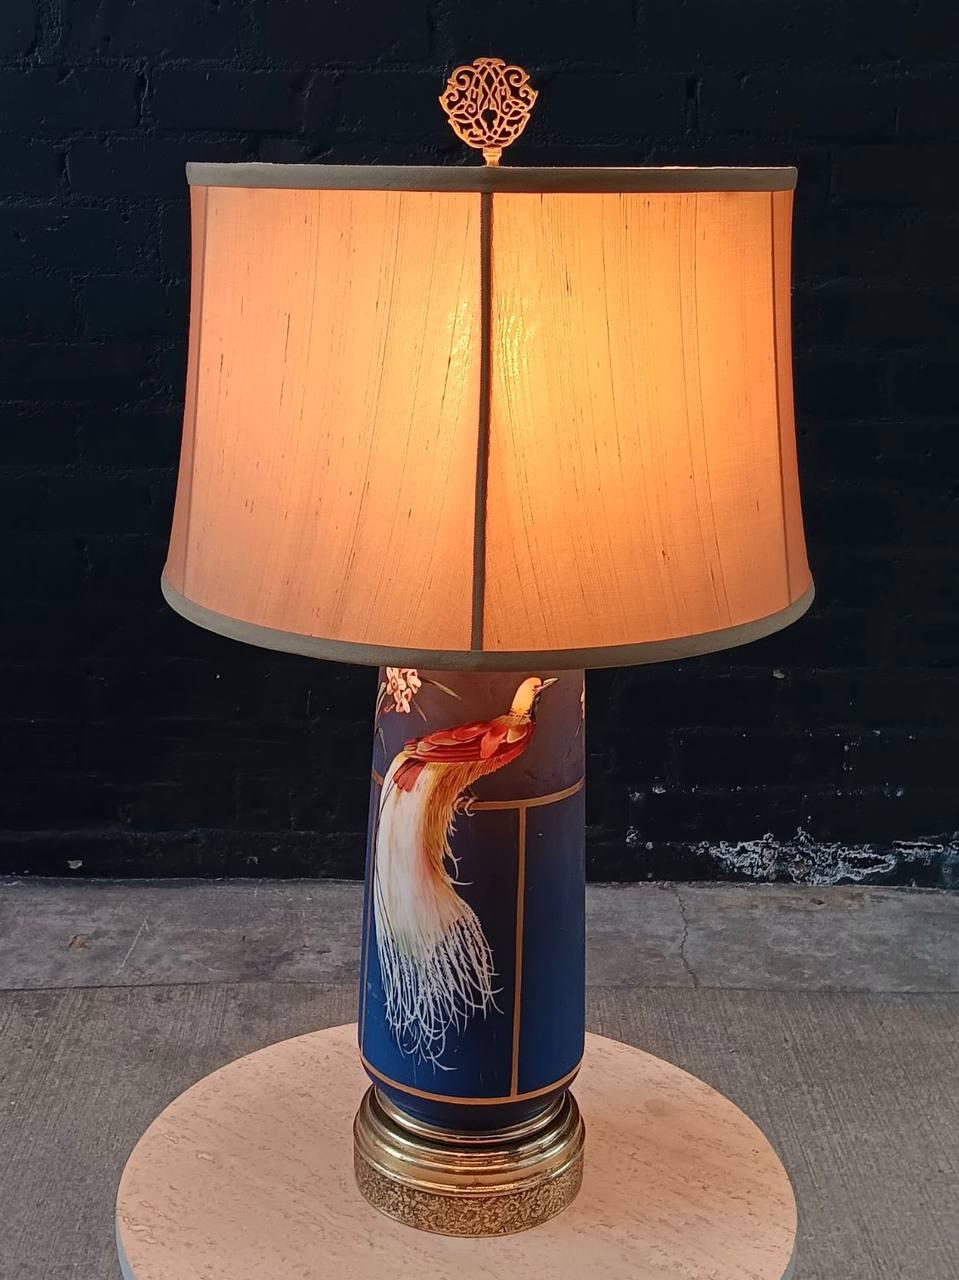 Regency Vintage French Porcelain & Brass Table Lamp with Bird Motif For Sale